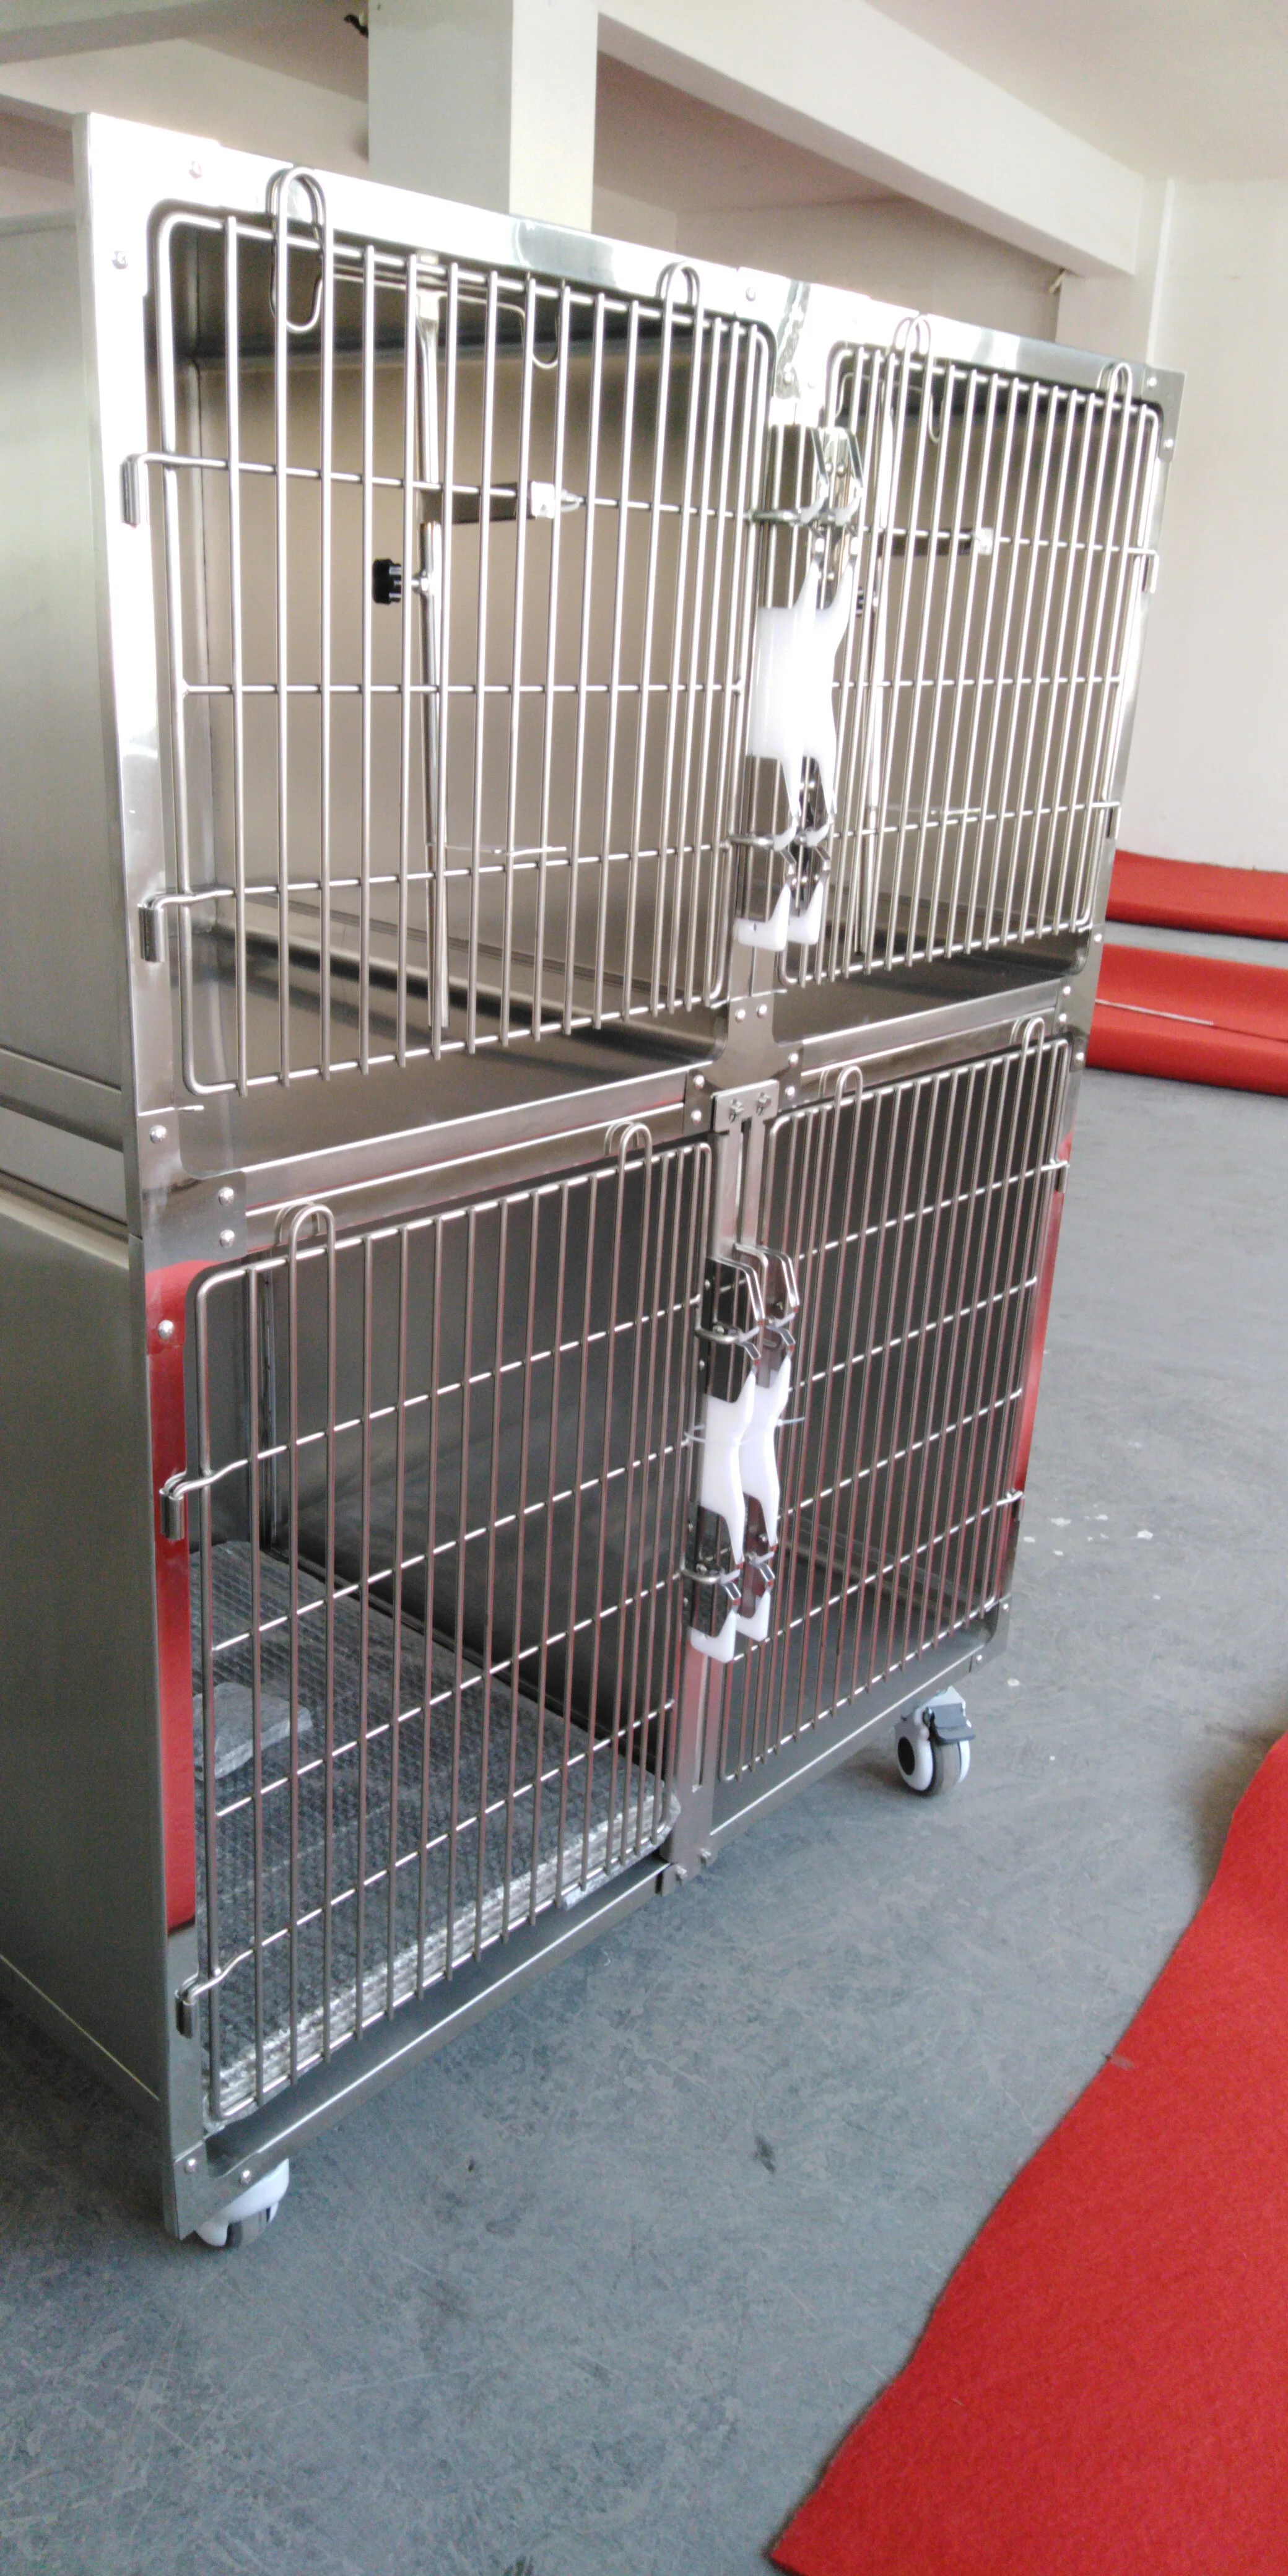 China dog cage pet hospital stainless steel wrought iron dog cage